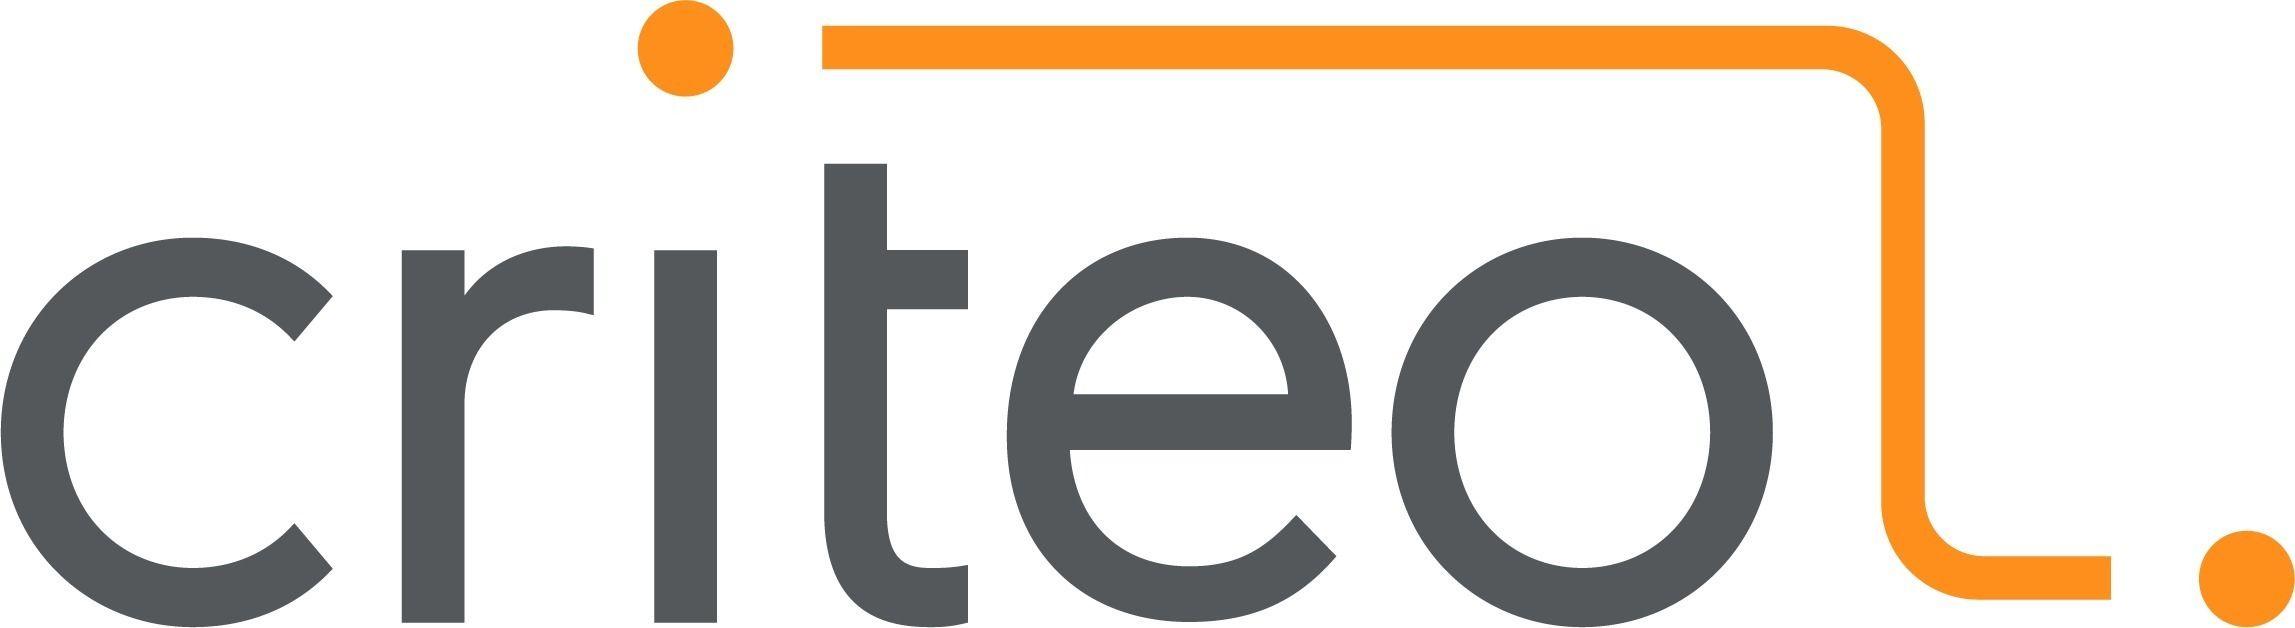 Criteo Logo - Criteo Falls After Yet Another Great Quarter -- The Motley Fool